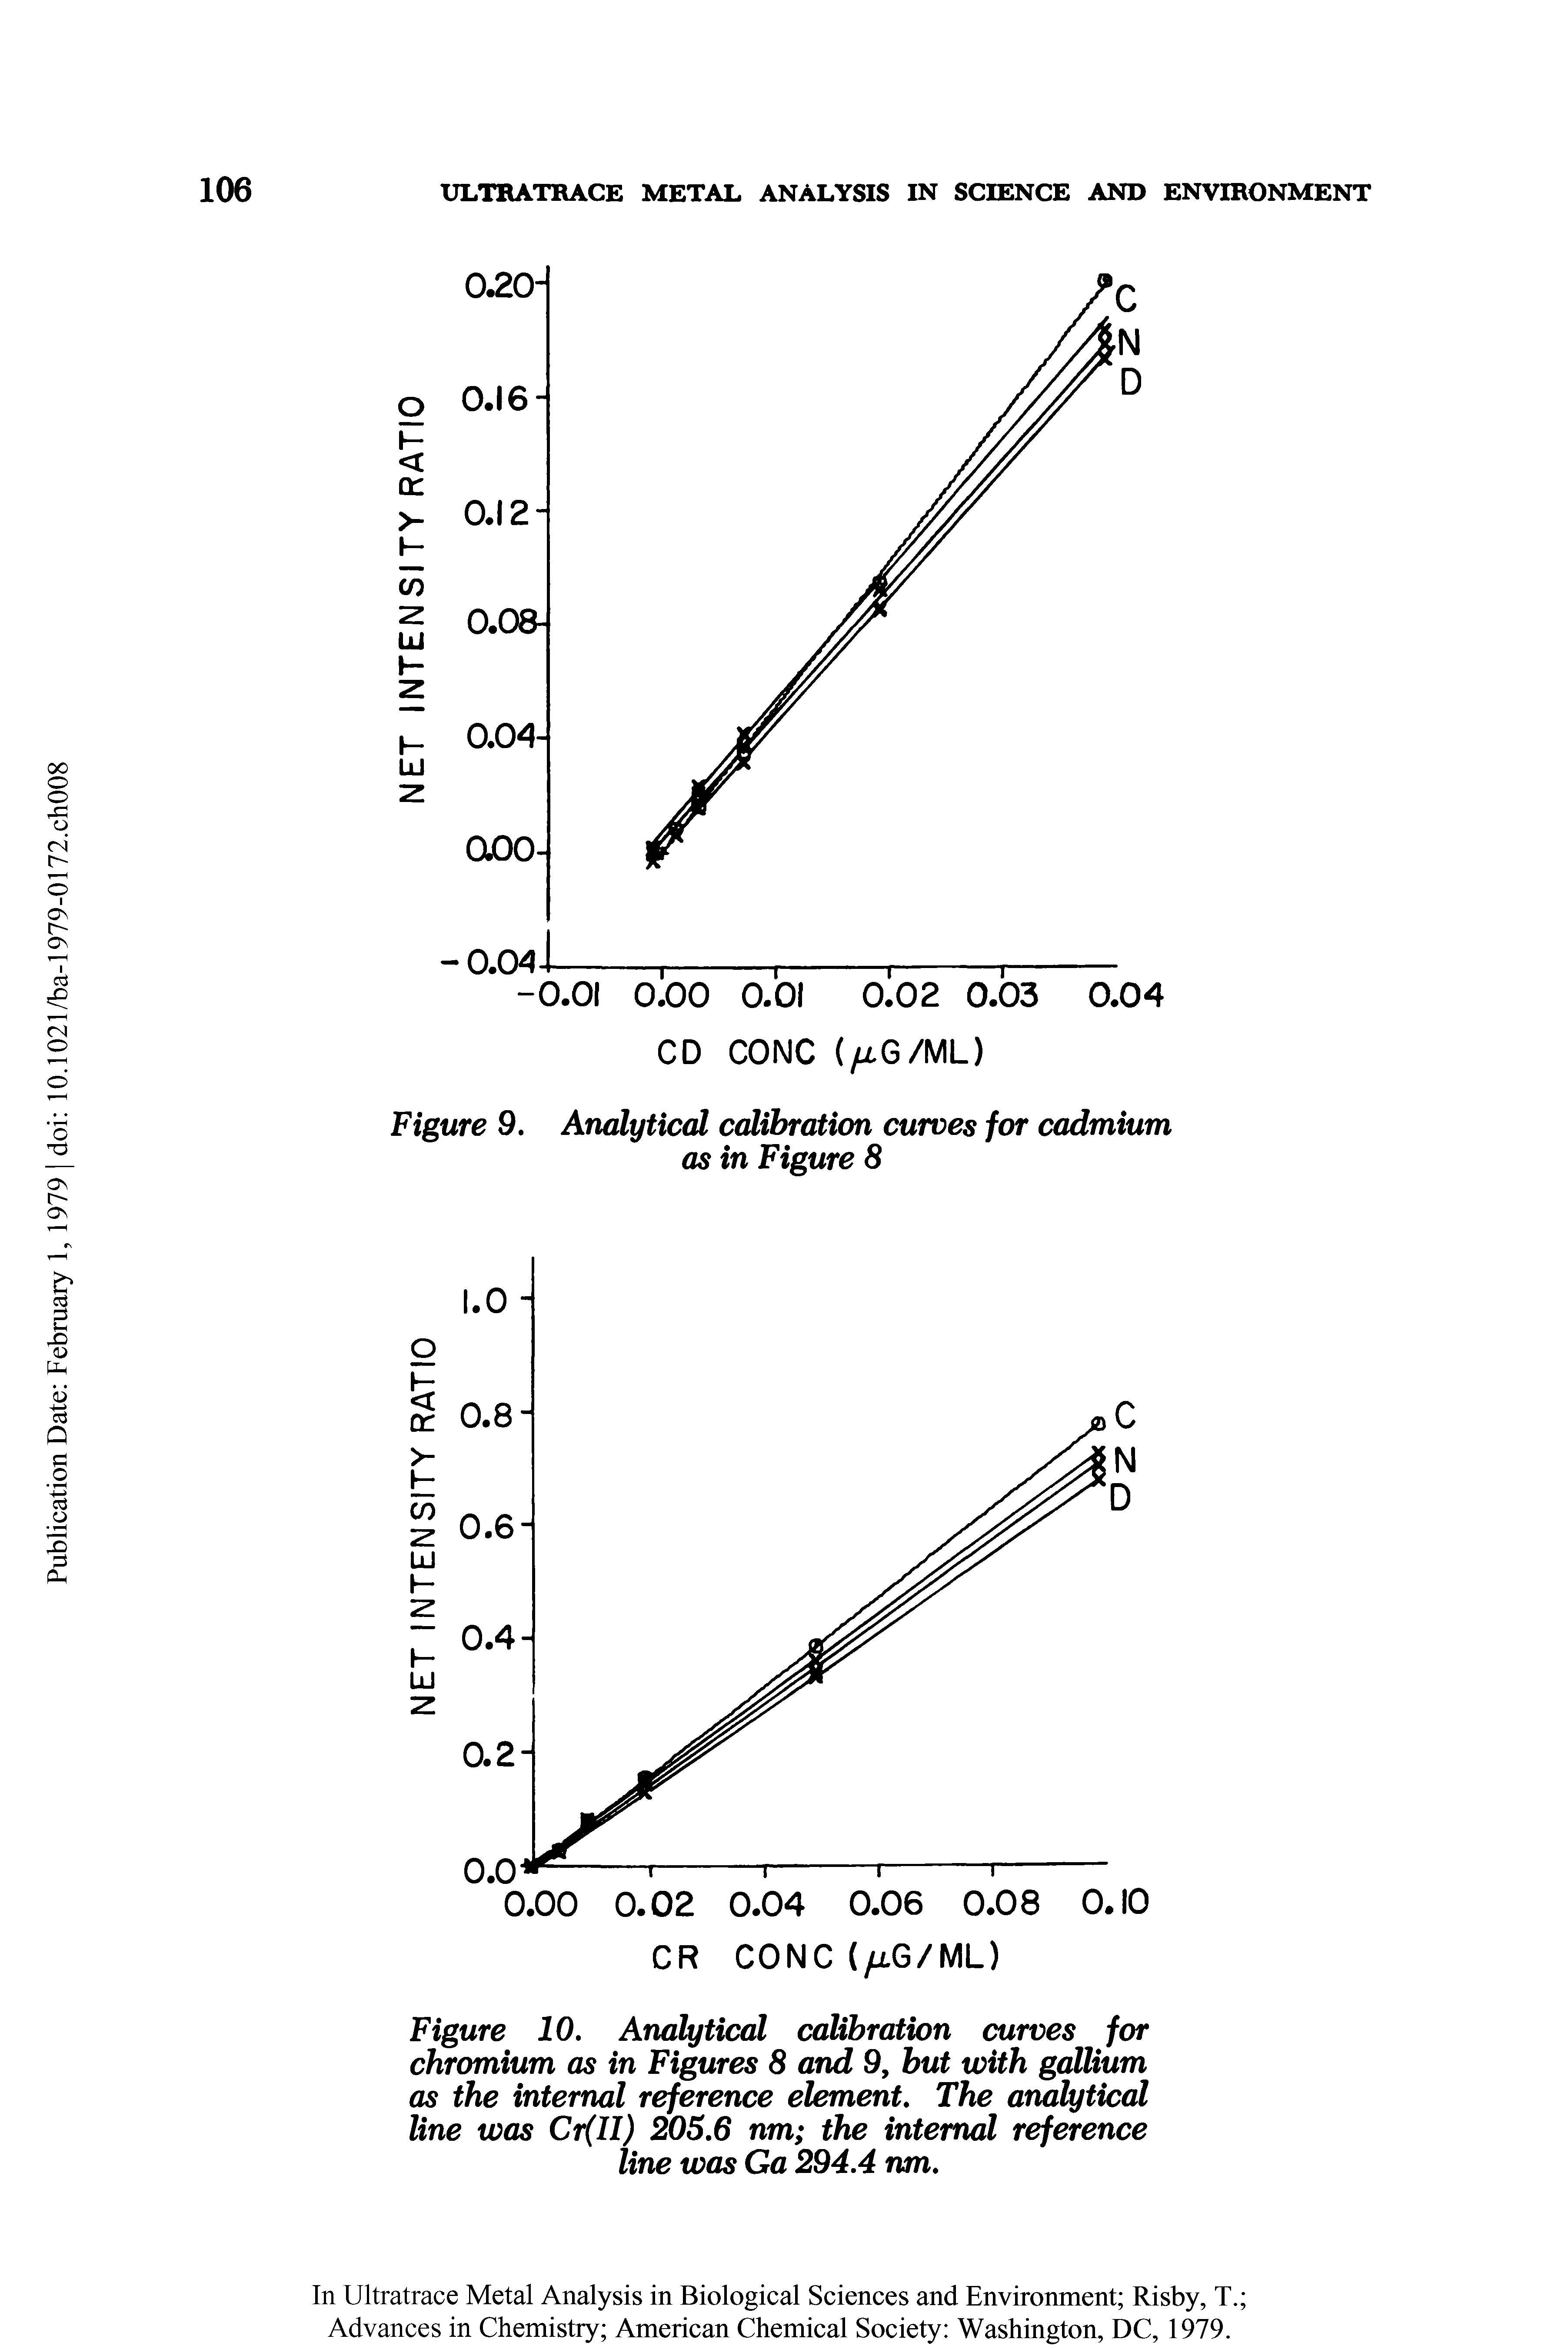 Figure 9. Analytical calibration curves for cadmium as in Figure 8...